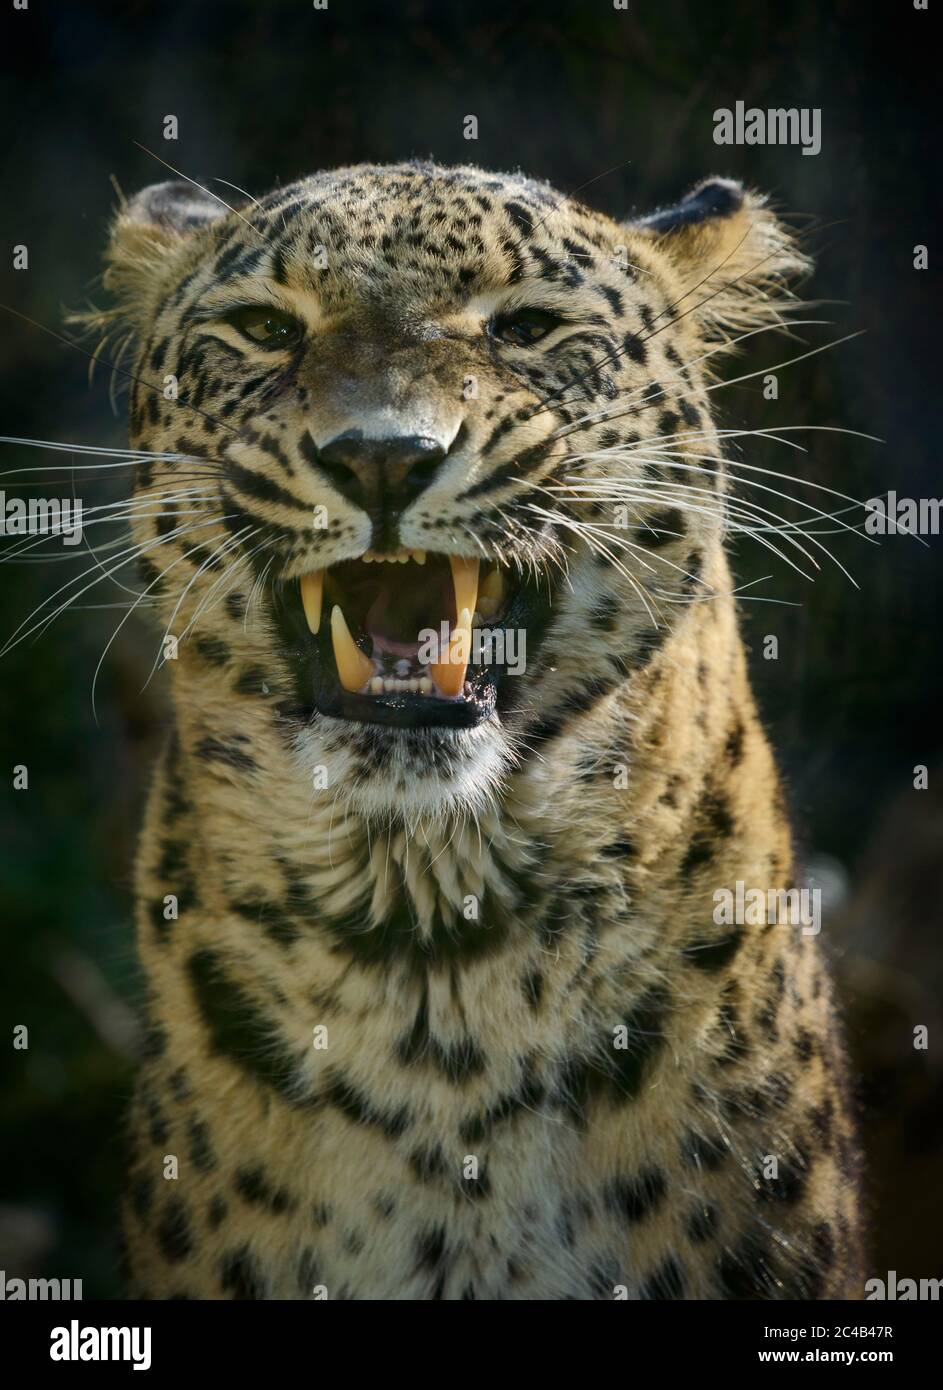 Leopard (Panthera pardus), male, hissing, captive, Occurrence in Africa and Asia Stock Photo